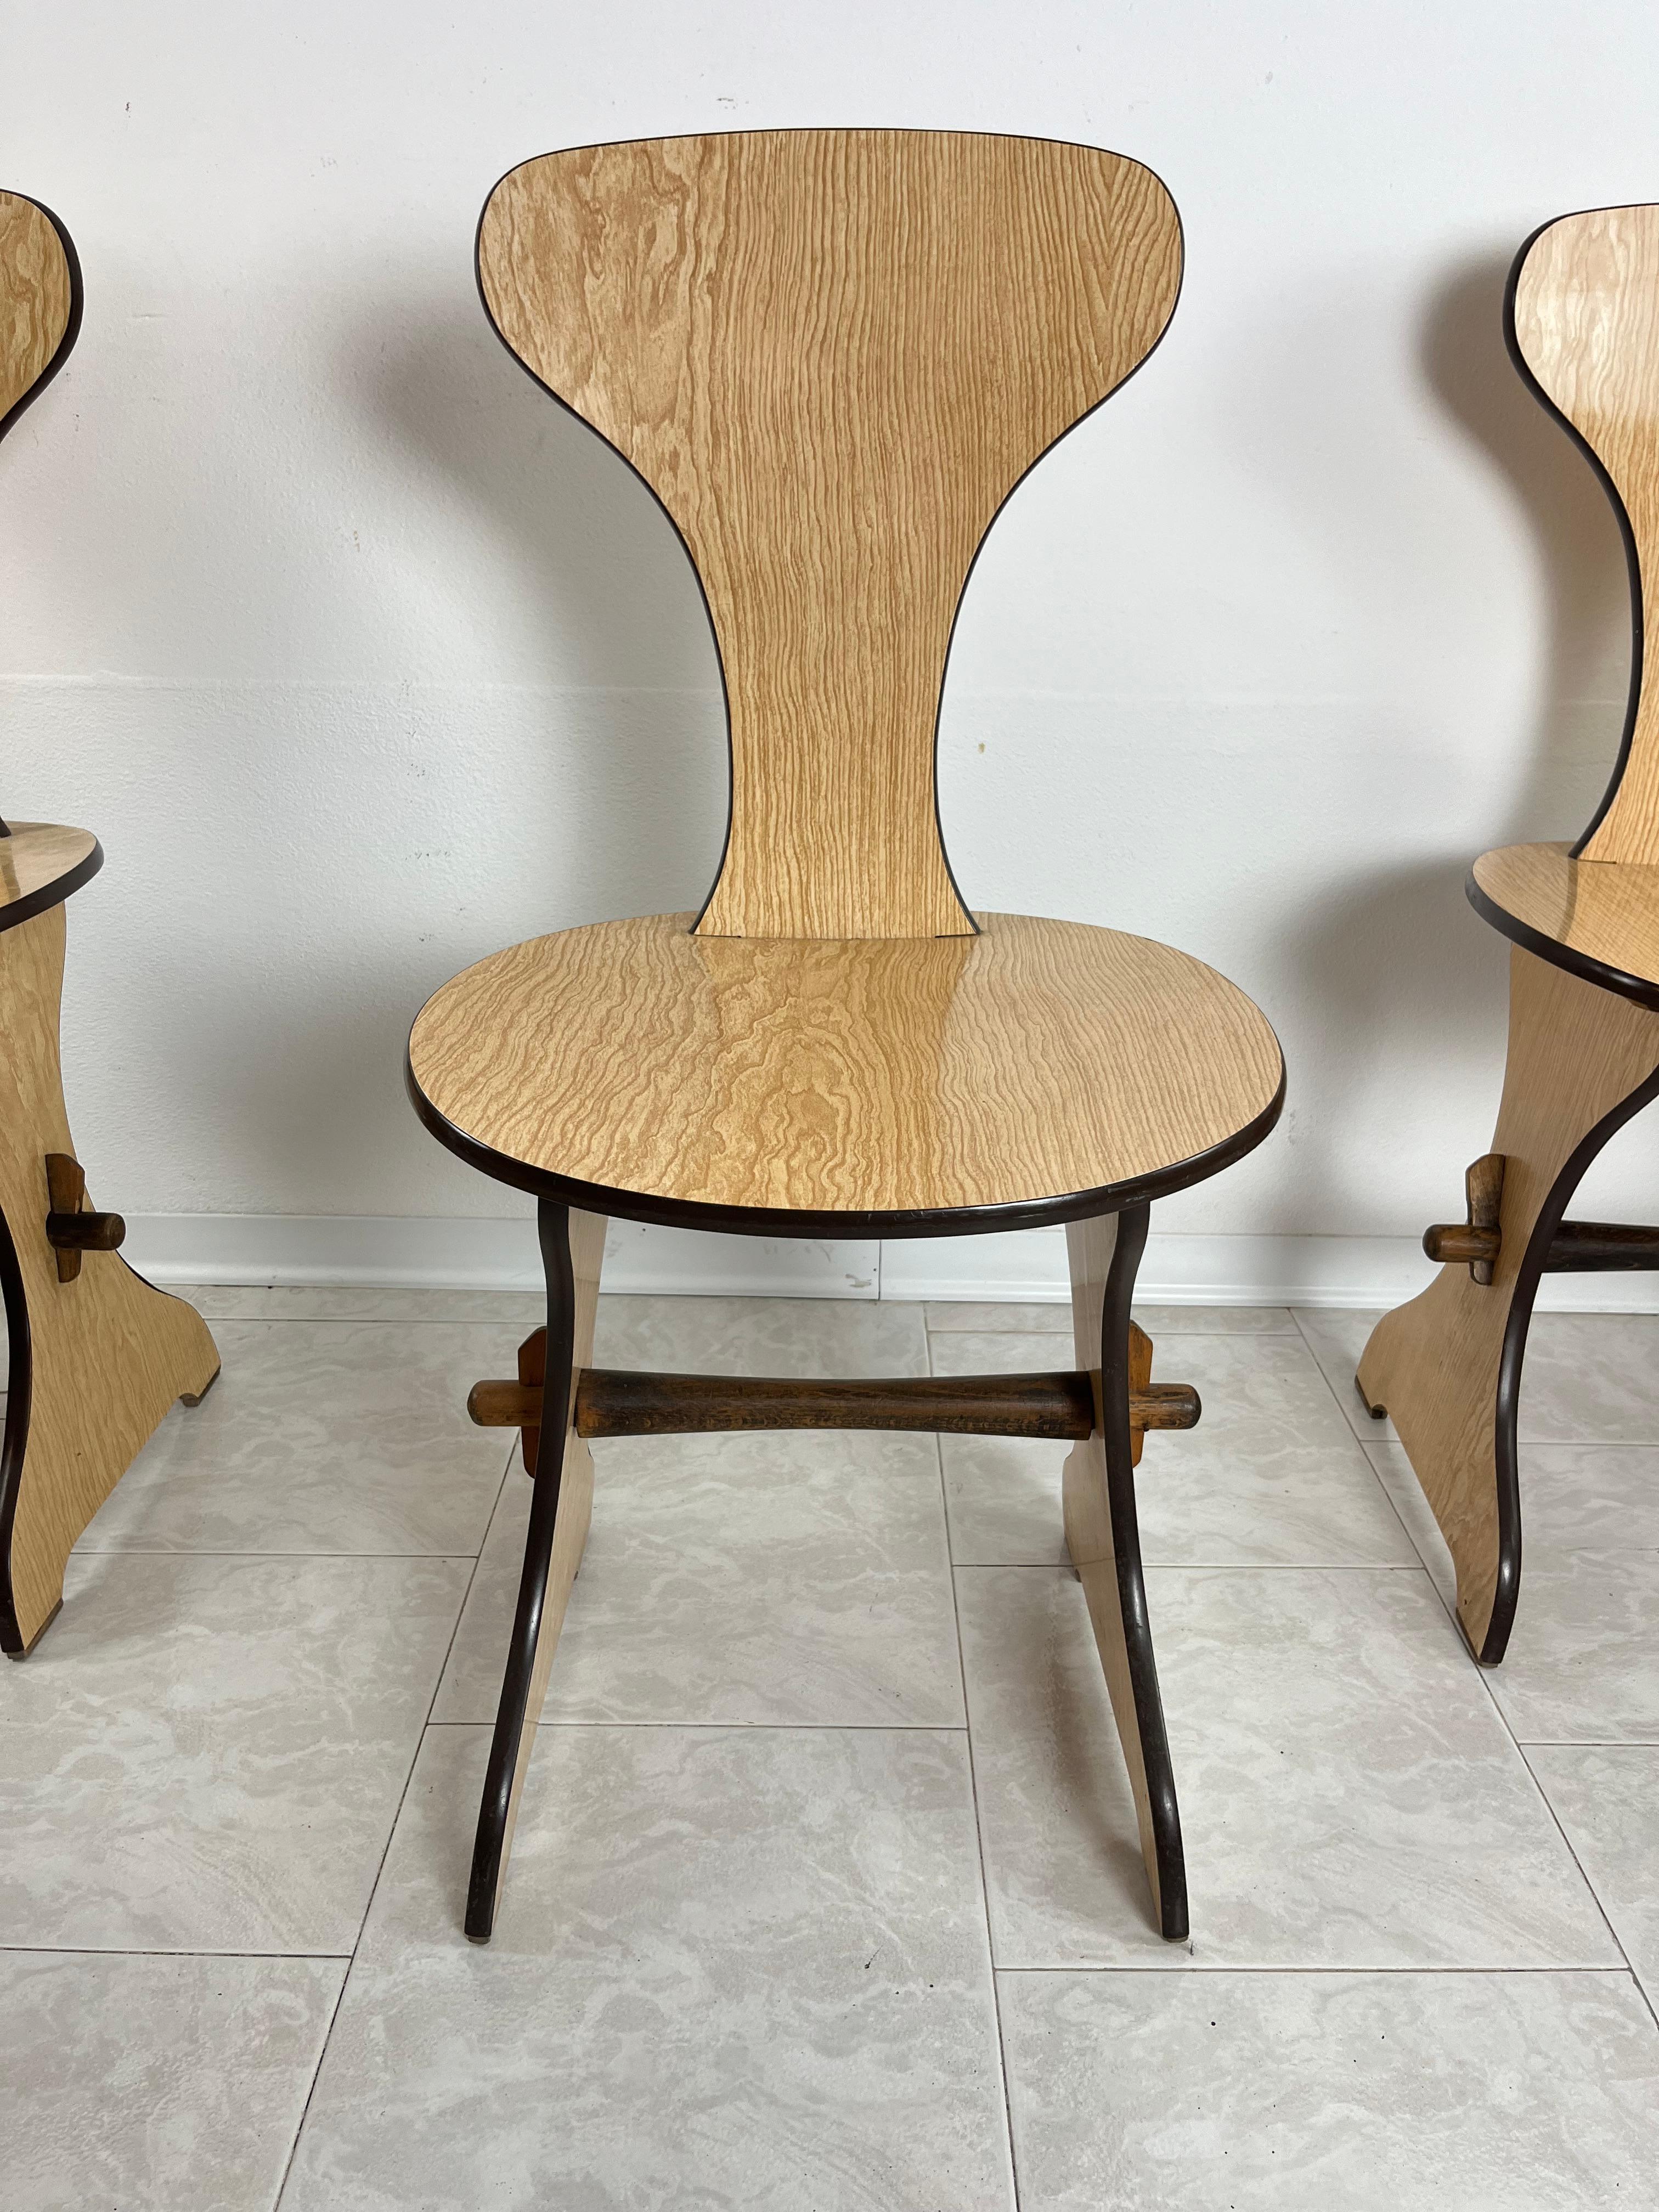 Set of 6 Pedini Fano Mid-Century chairs, Italian design 1960s
Curved and shaped beech plywood, light laminate, intact and in good condition, small signs of aging.